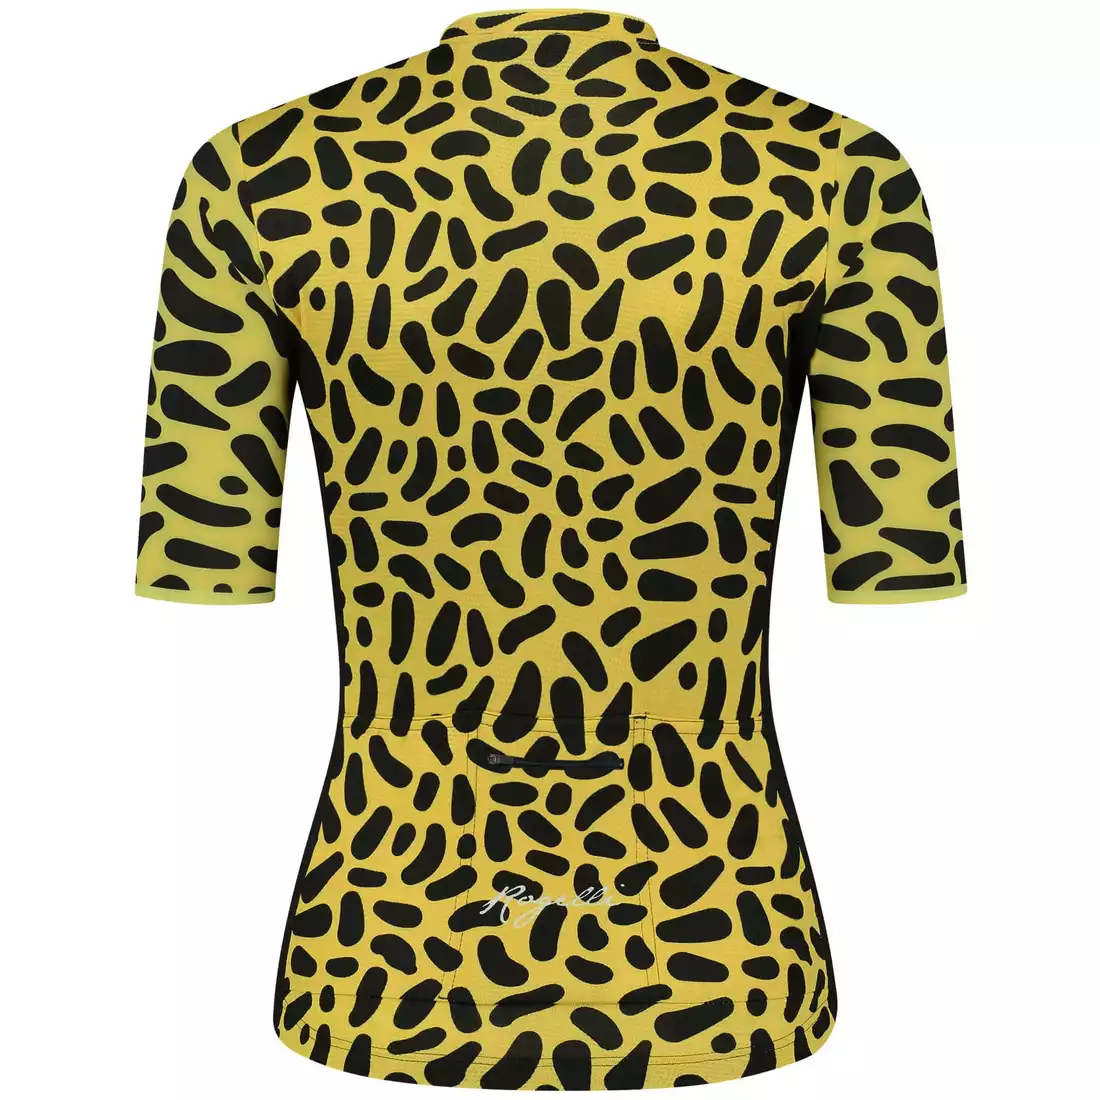 Rogelli ABSTRACT women's cycling jersey, yellow-black